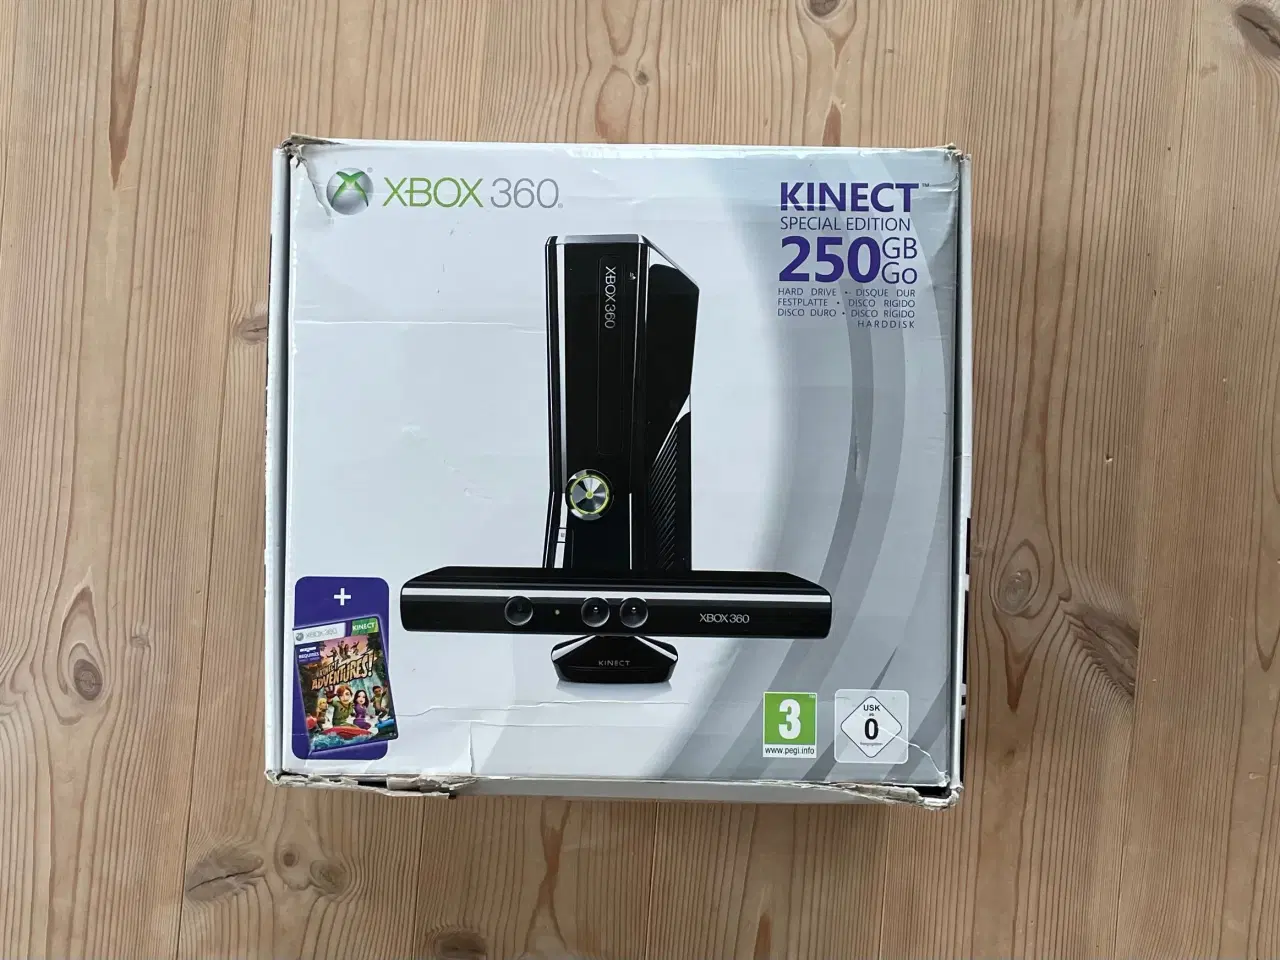 Billede 7 - Xbox 360, Kinect special edition 250 gb harddrive